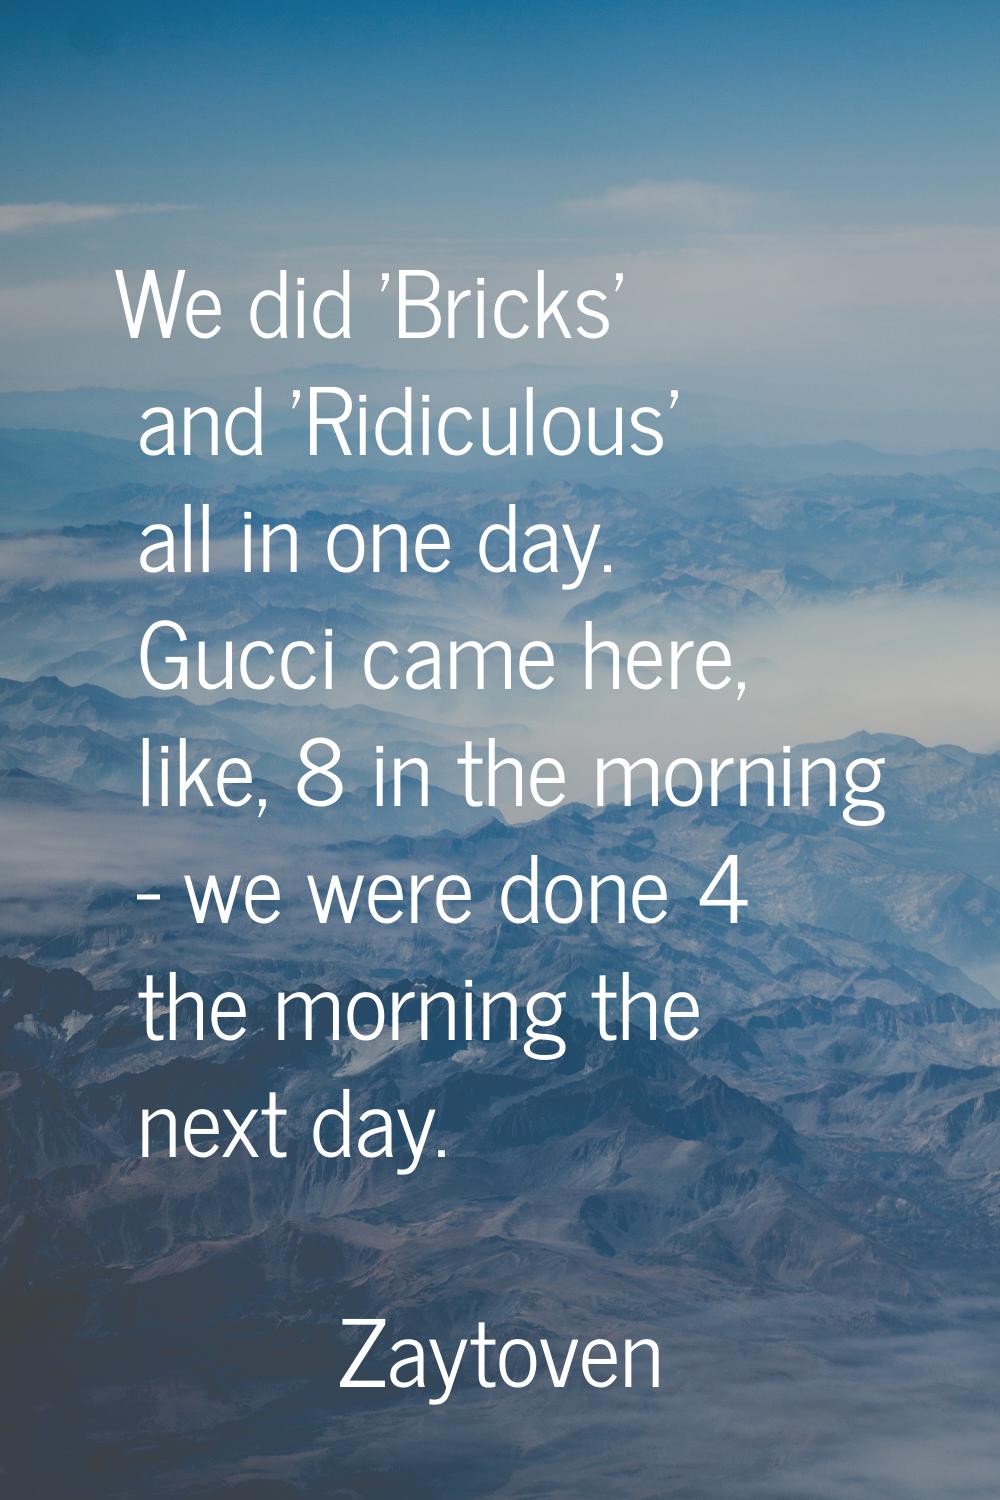 We did 'Bricks' and 'Ridiculous' all in one day. Gucci came here, like, 8 in the morning - we were 